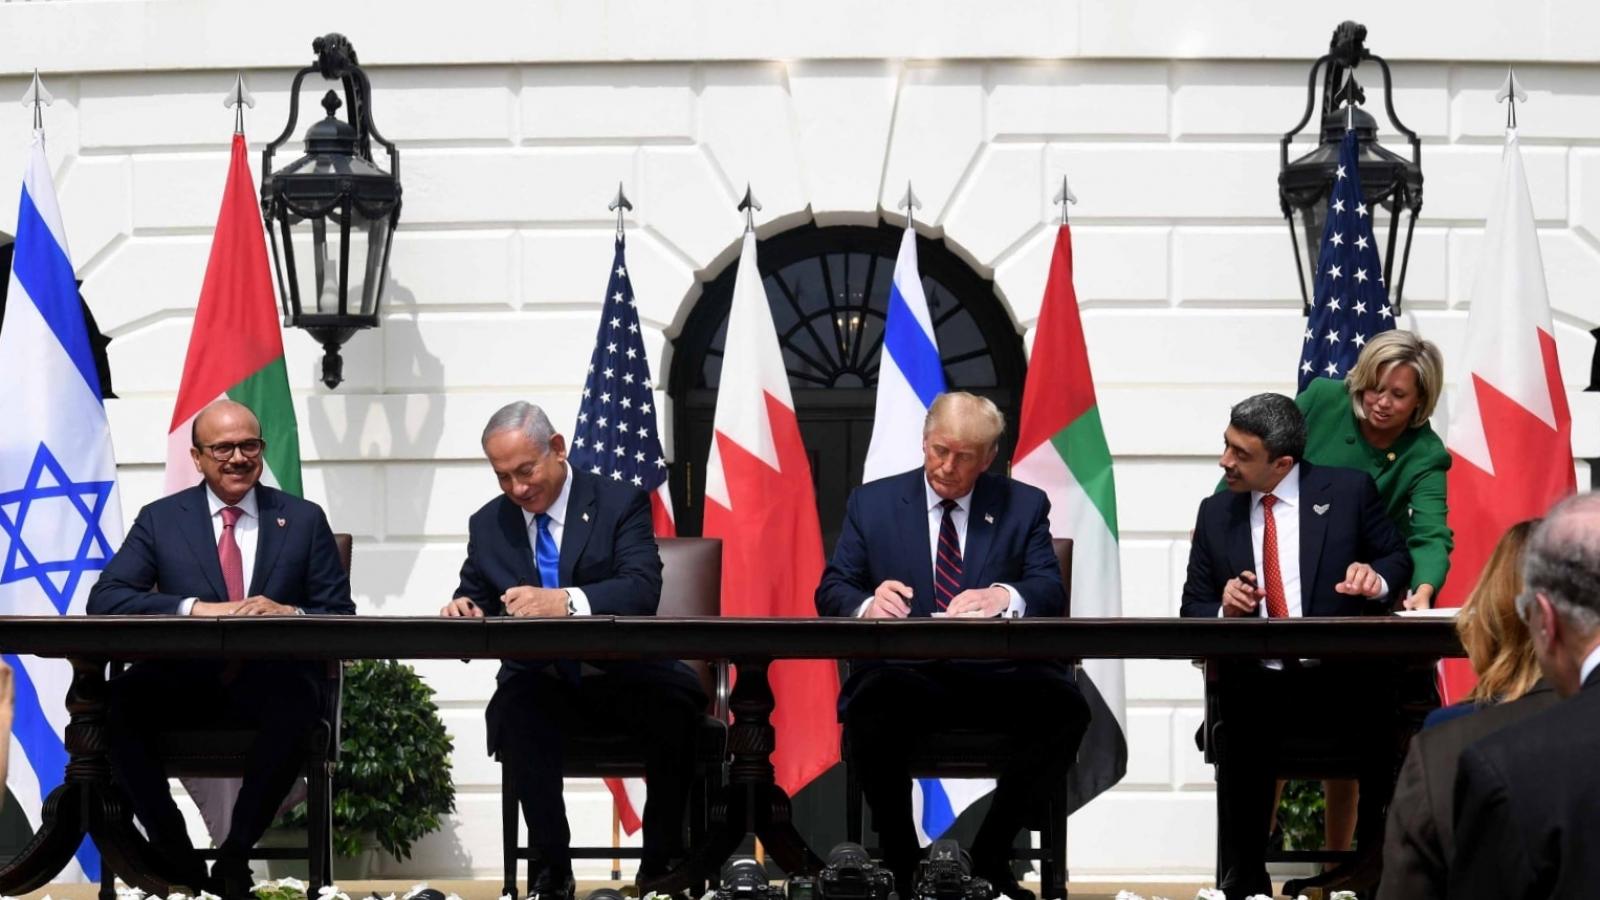 Historic Middle East peace deal follows more than a halfcentury of